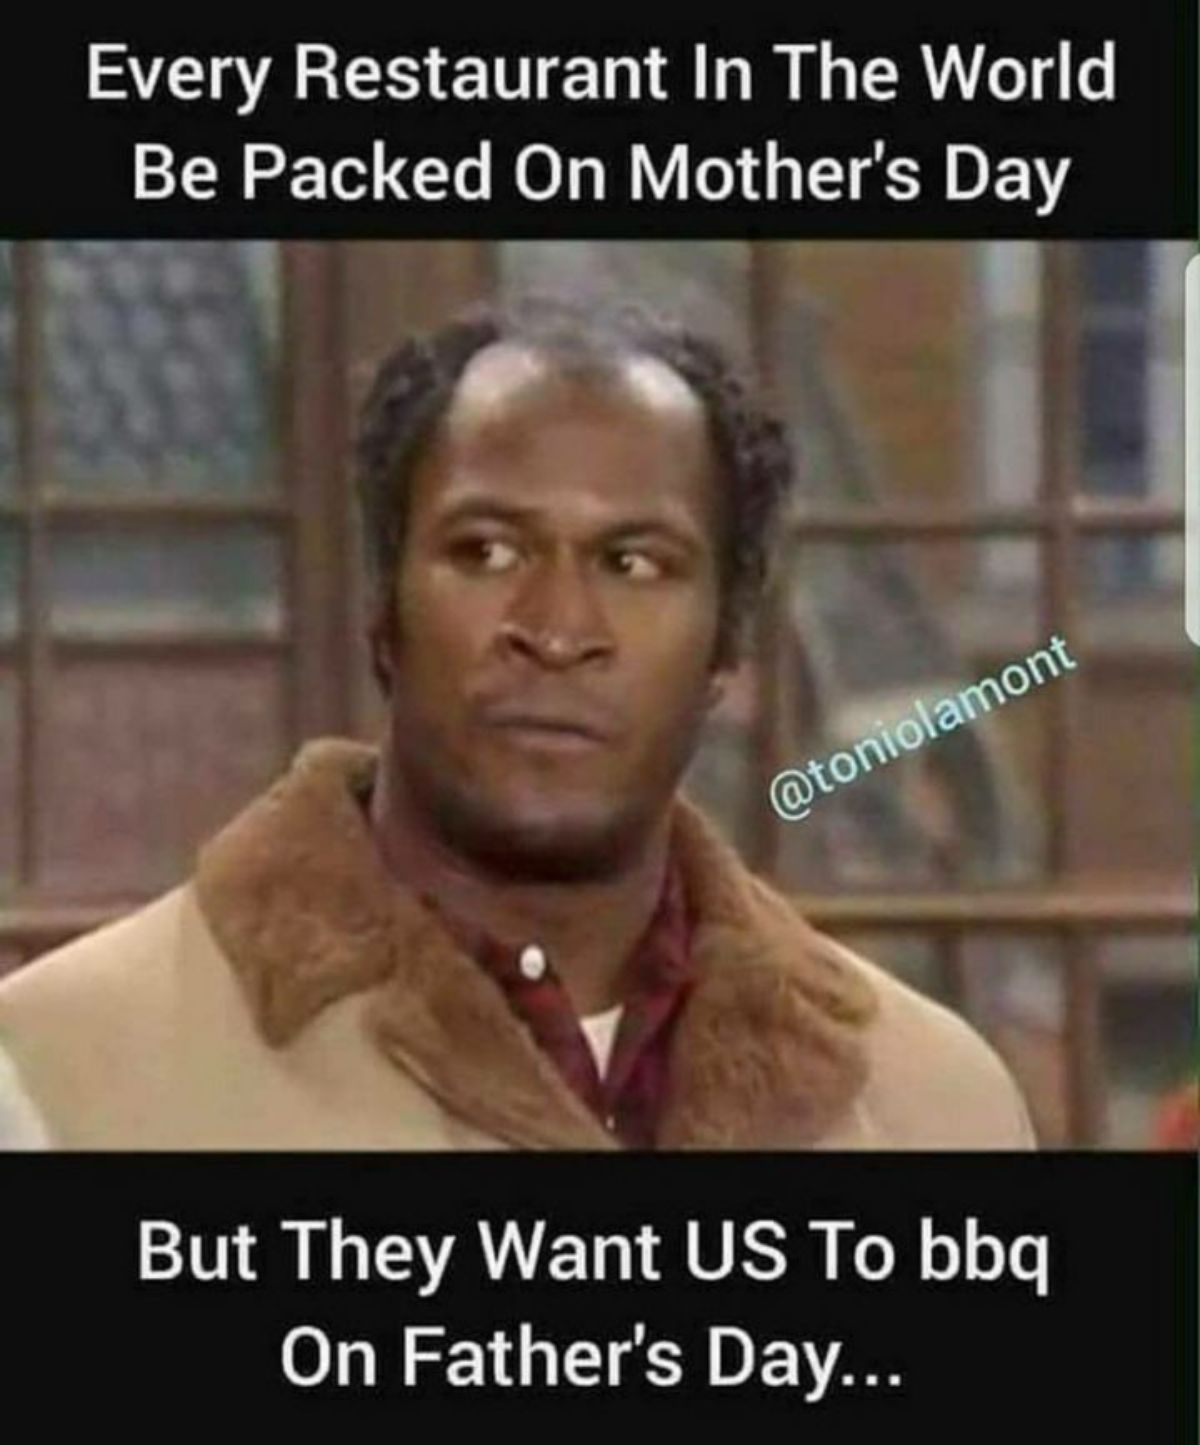 happy fathers day meme - Every Restaurant In The World Be Packed On Mother's Day But They Want Us To bbq On Father's Day...